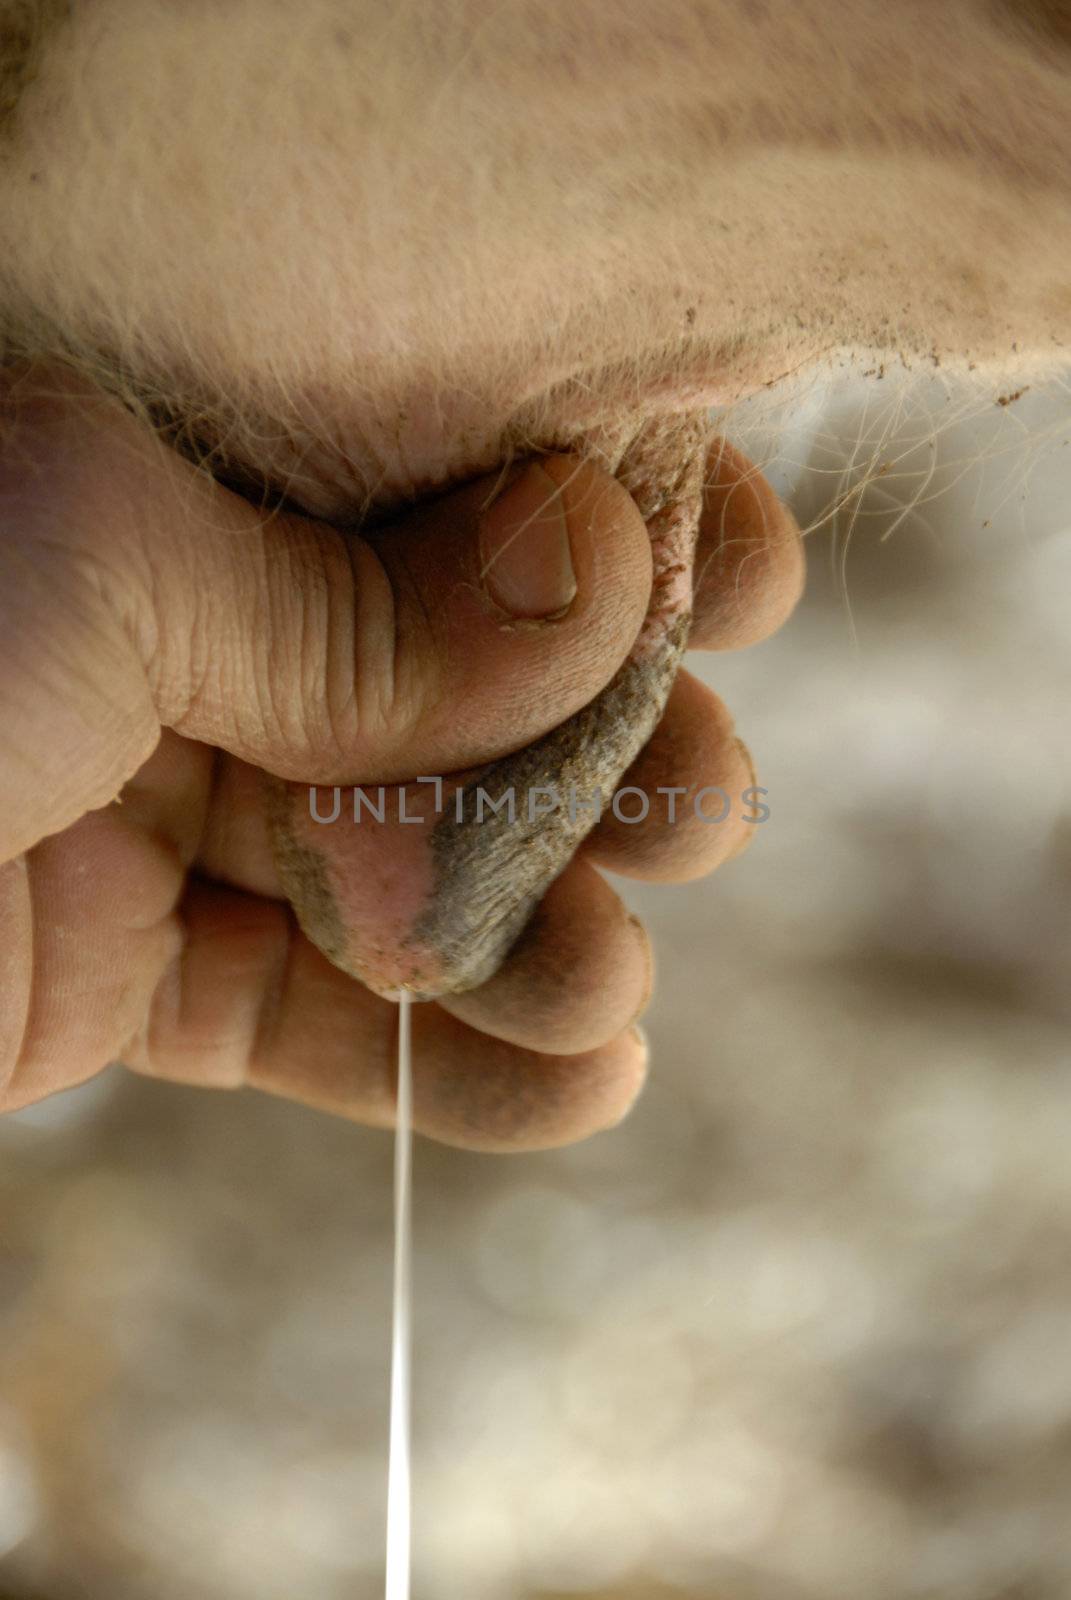 milkman milking a cow; close up on the udder